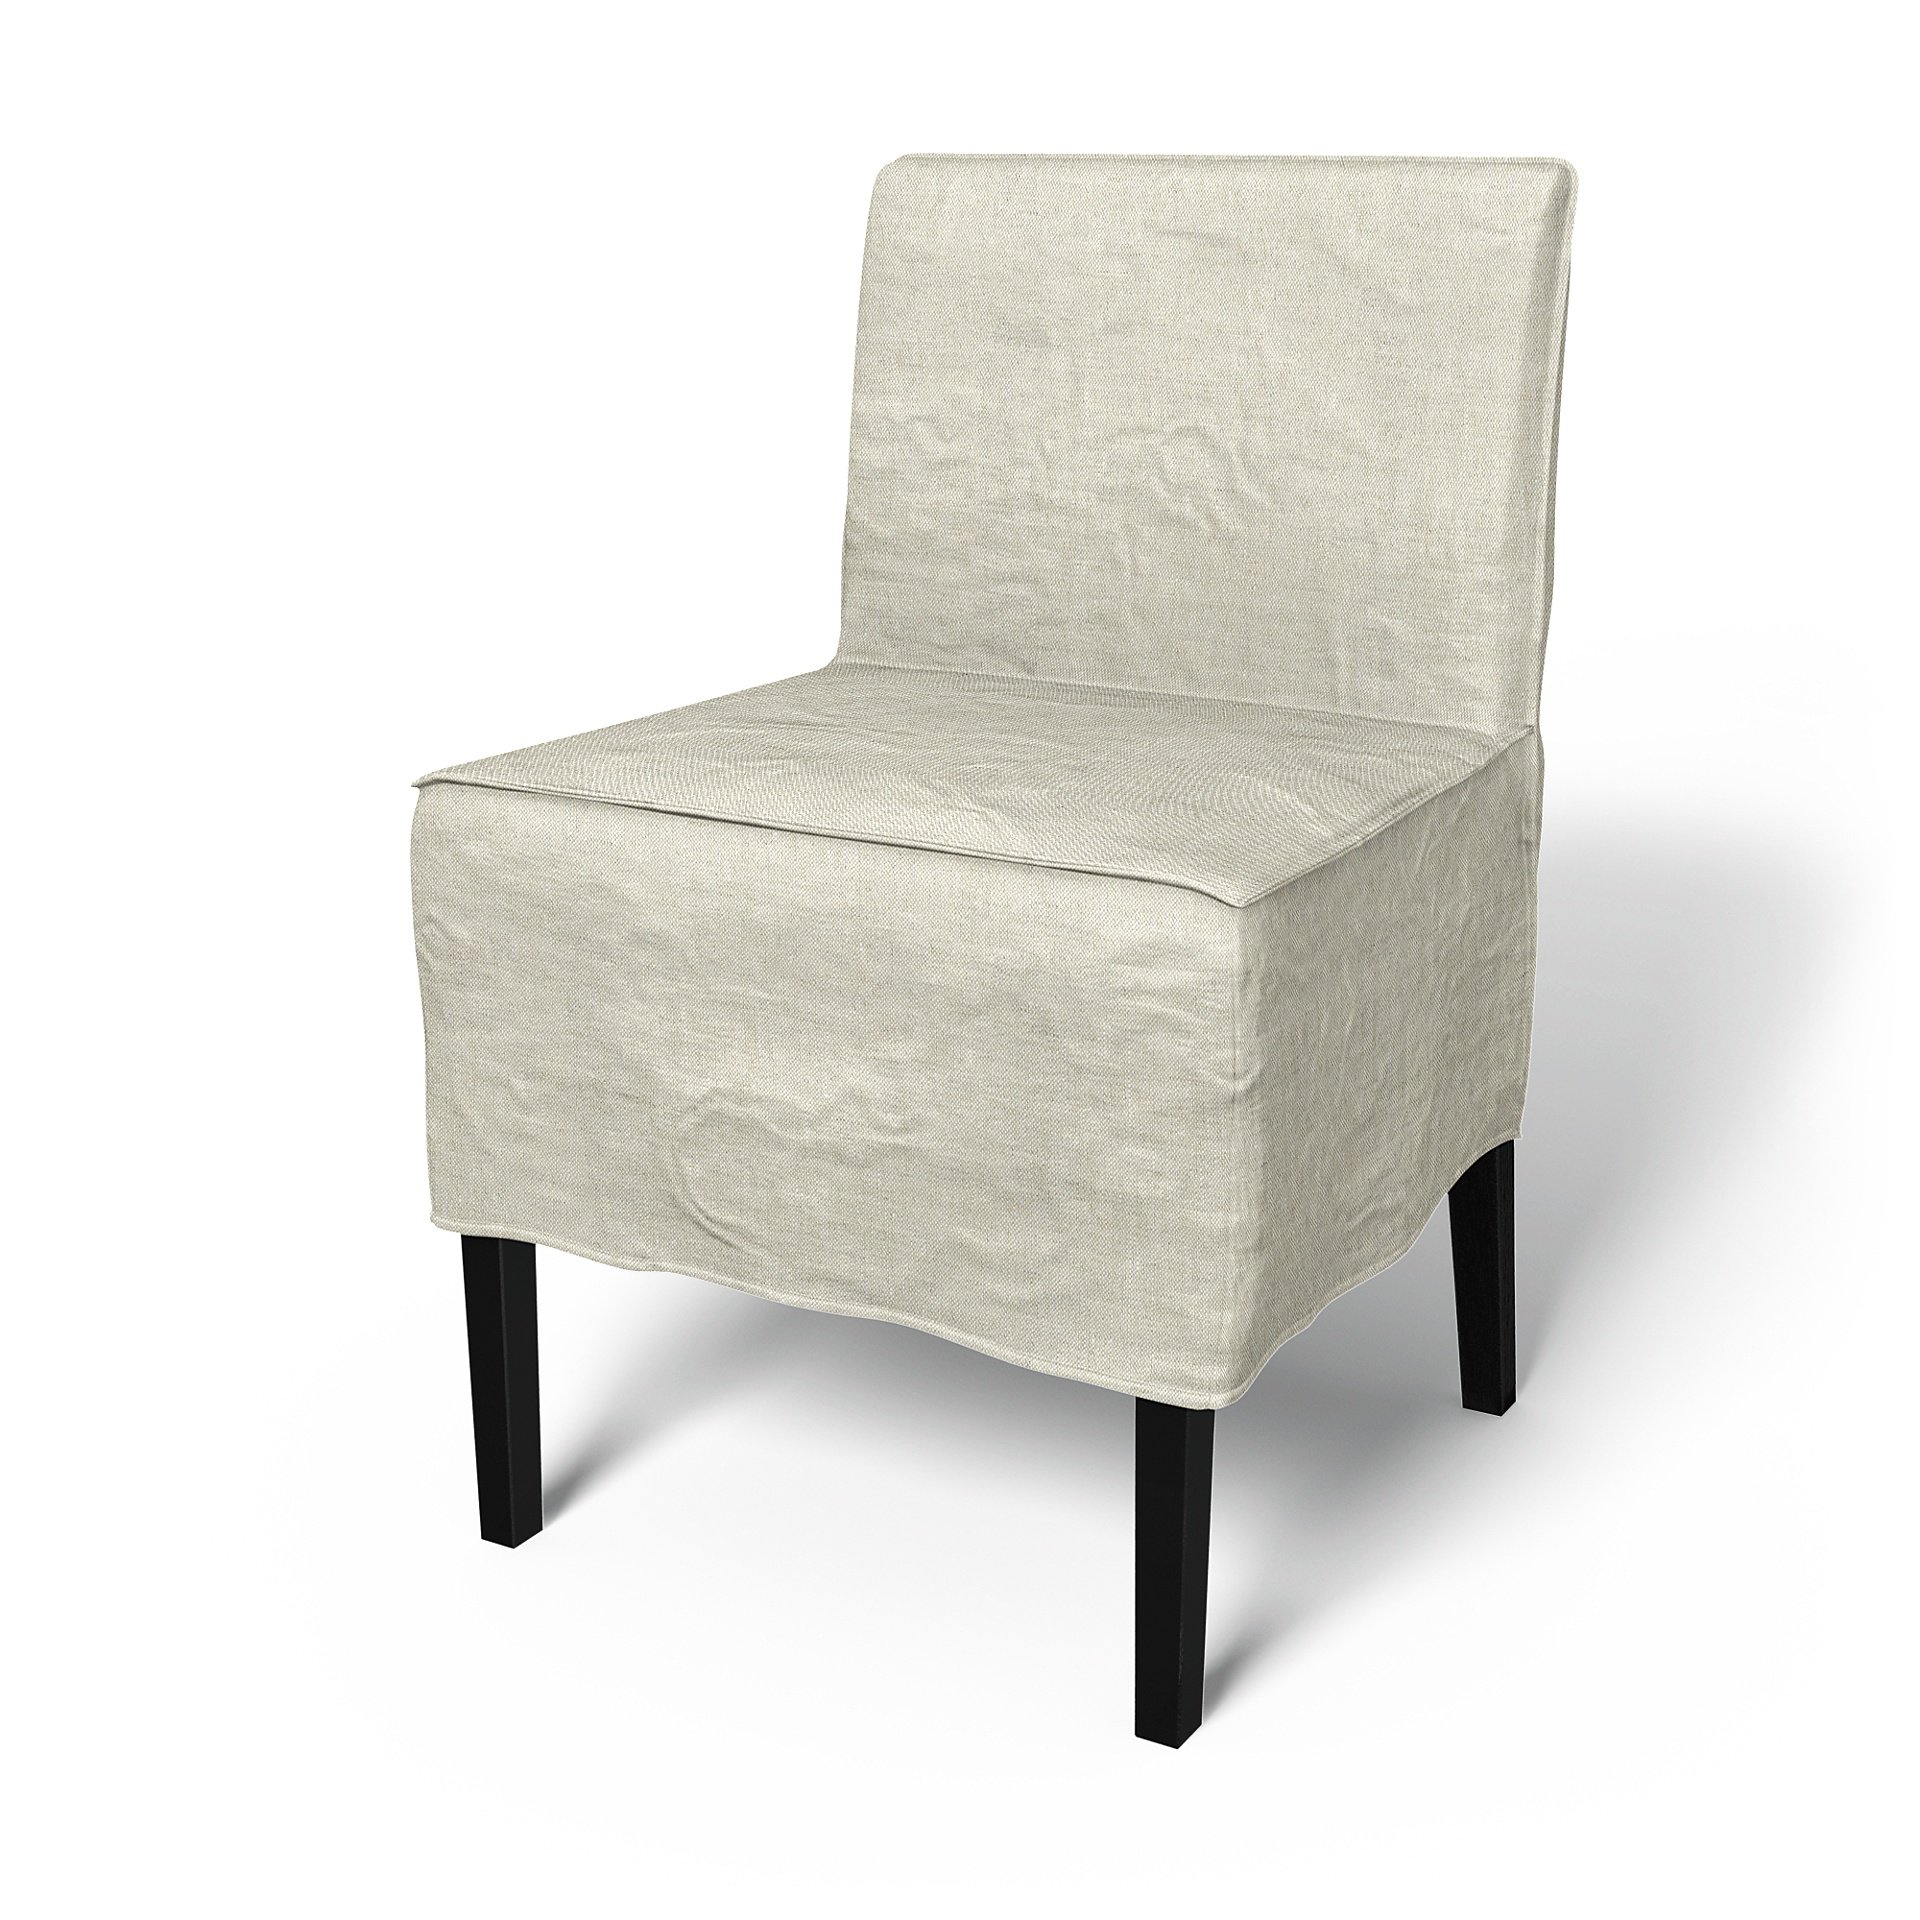 IKEA - Nils Dining Chair Cover, Natural, Linen - Bemz